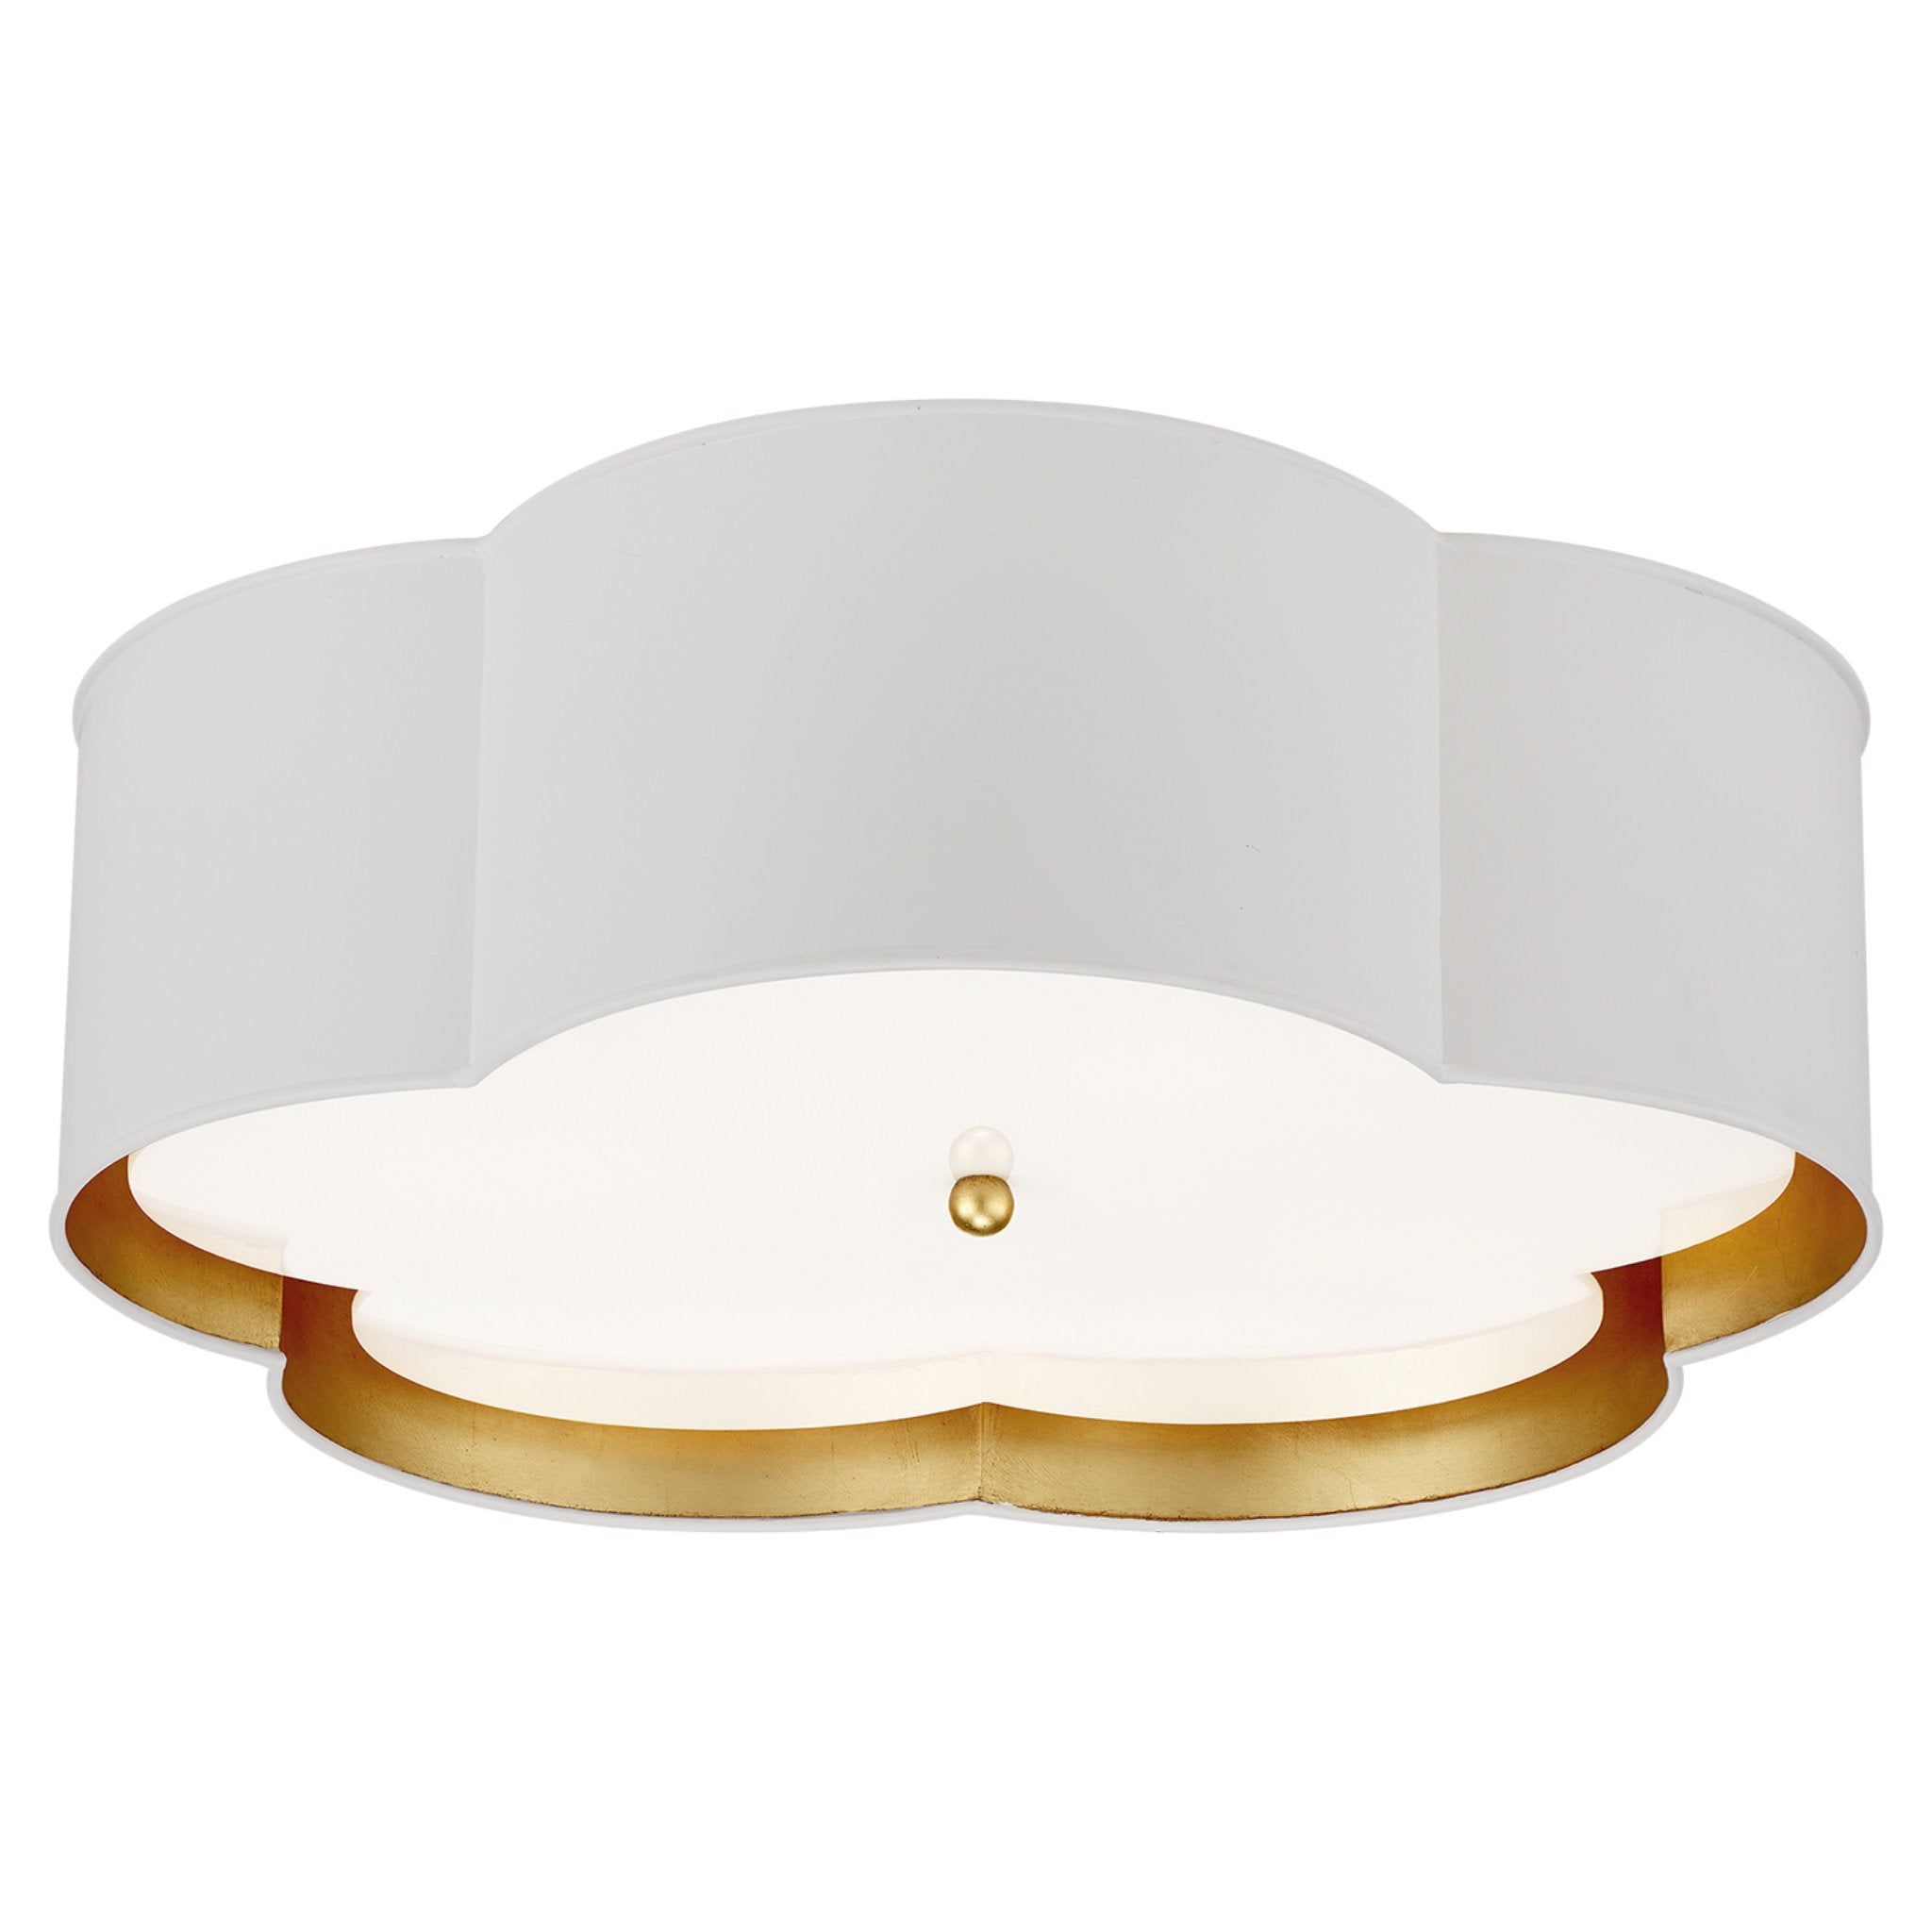 kate spade new york Bryce Large Flower Flush Mount in White and Gild w